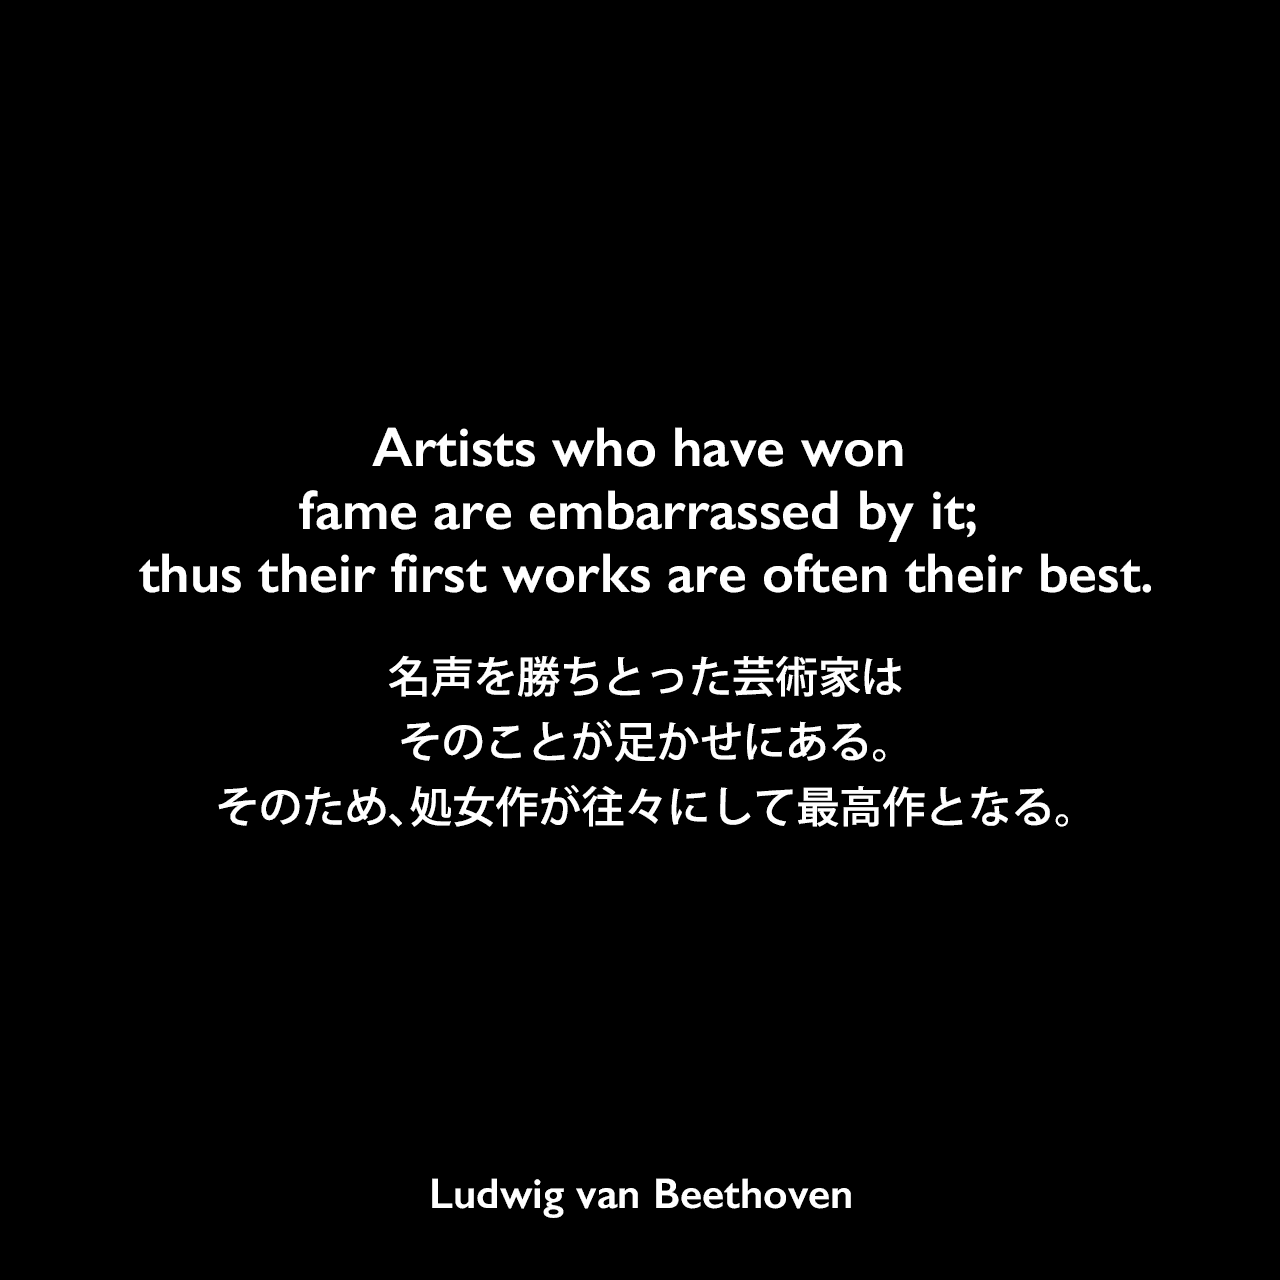 Artists who have won fame are embarrassed by it; thus their first works are often their best.名声を勝ちとった芸術家は、そのことが足かせにある。そのため、処女作が往々にして最高作となる。Ludwig van Beethoven